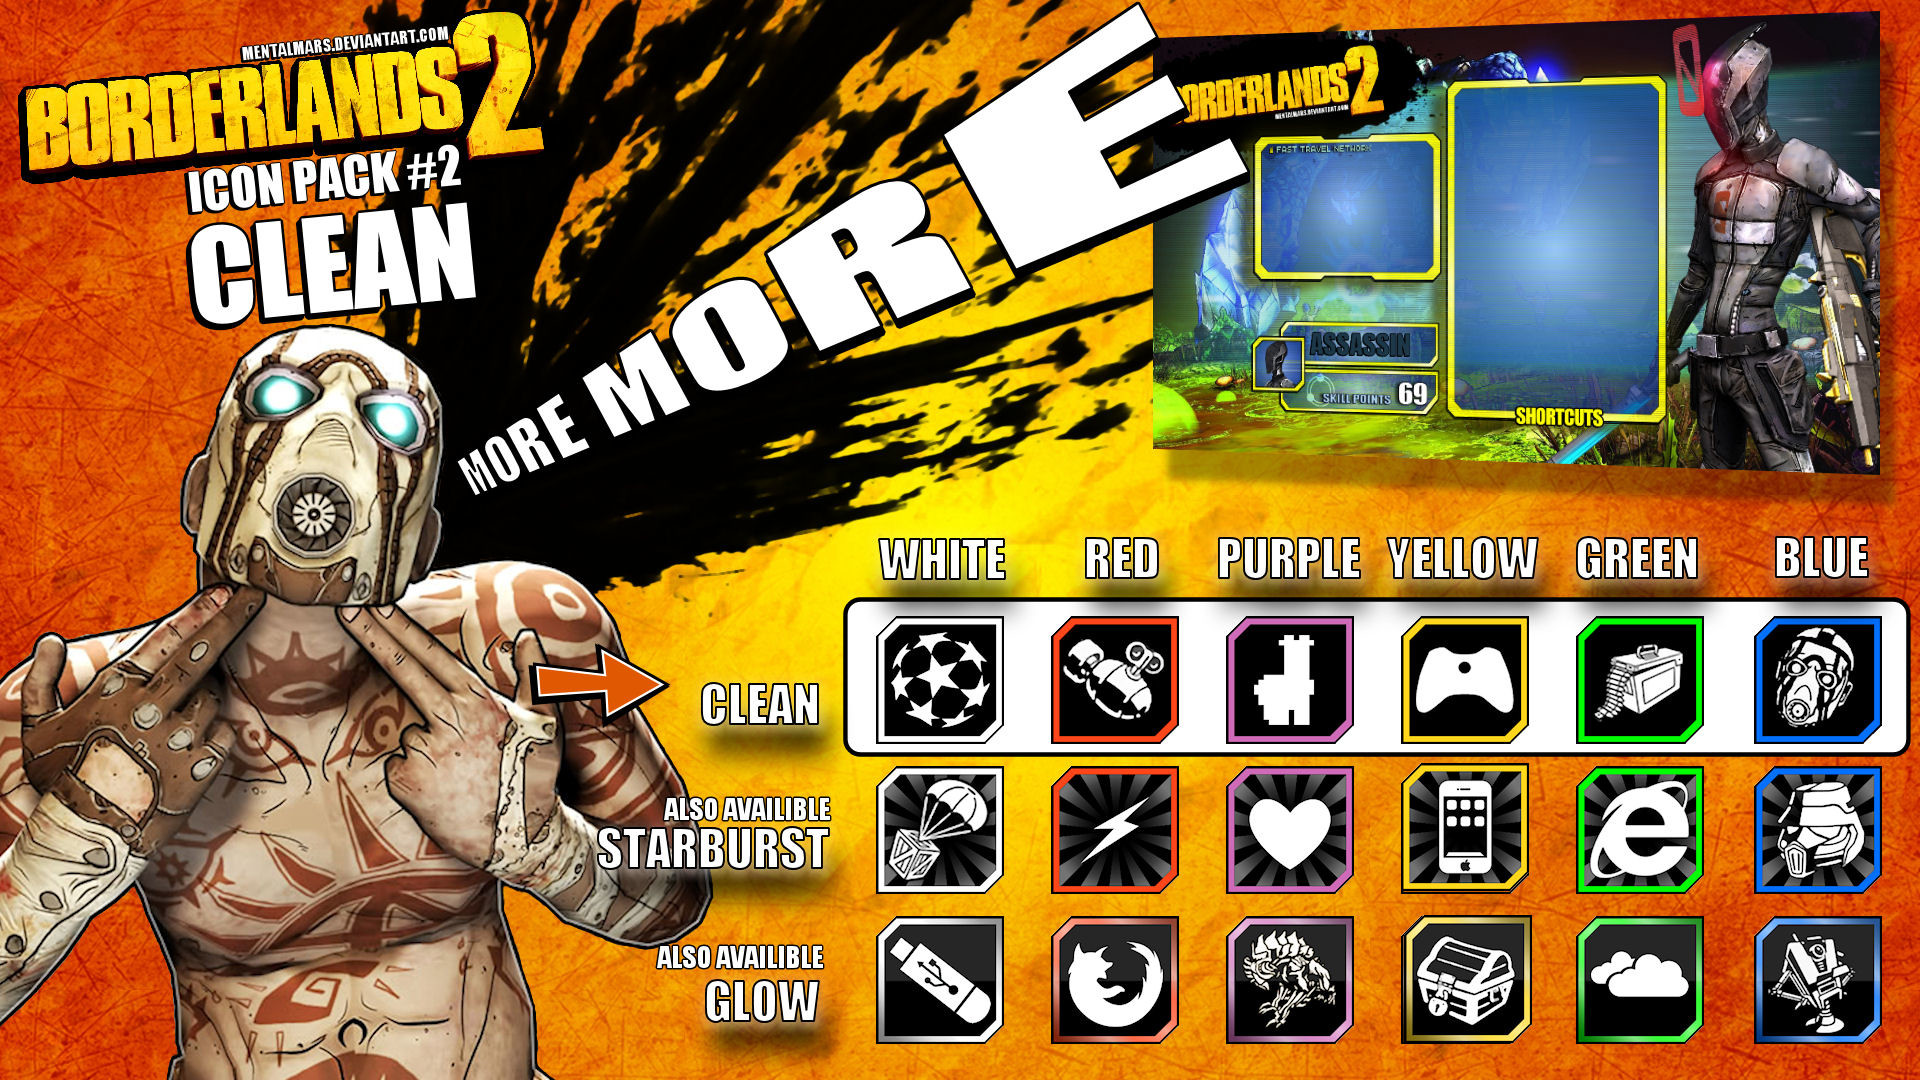 1920x1080 ... Borderlands 2 Icon pack 2 - CLEAN by mentalmars